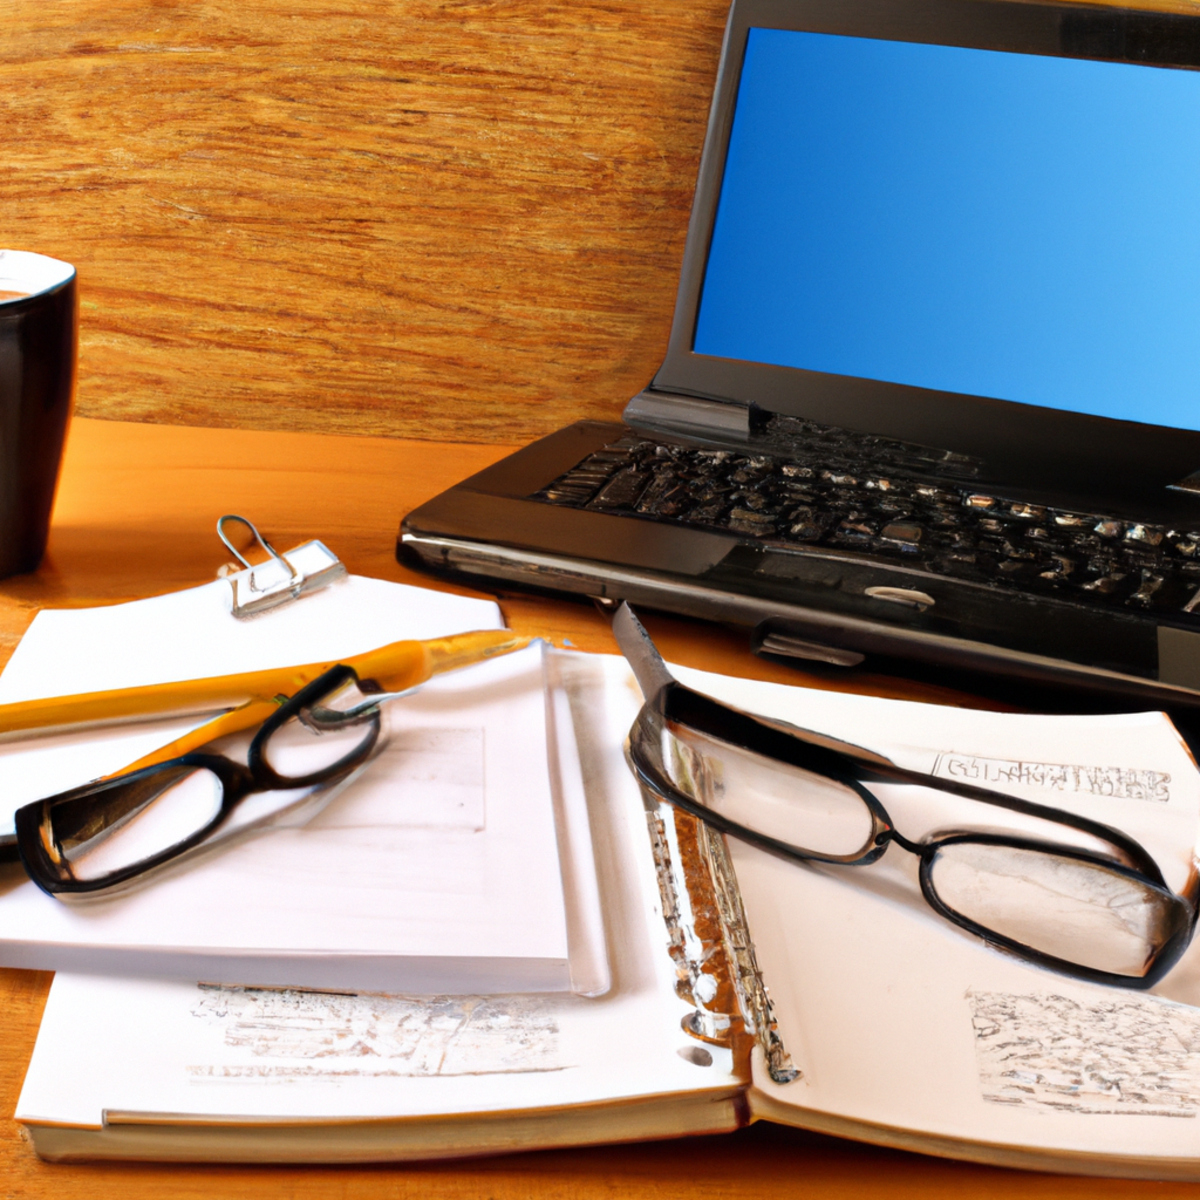 Cluttered desk with laptop, notepad, pen, coffee mug, and glasses symbolizing cognitive disconnection in Capgras Syndrome.